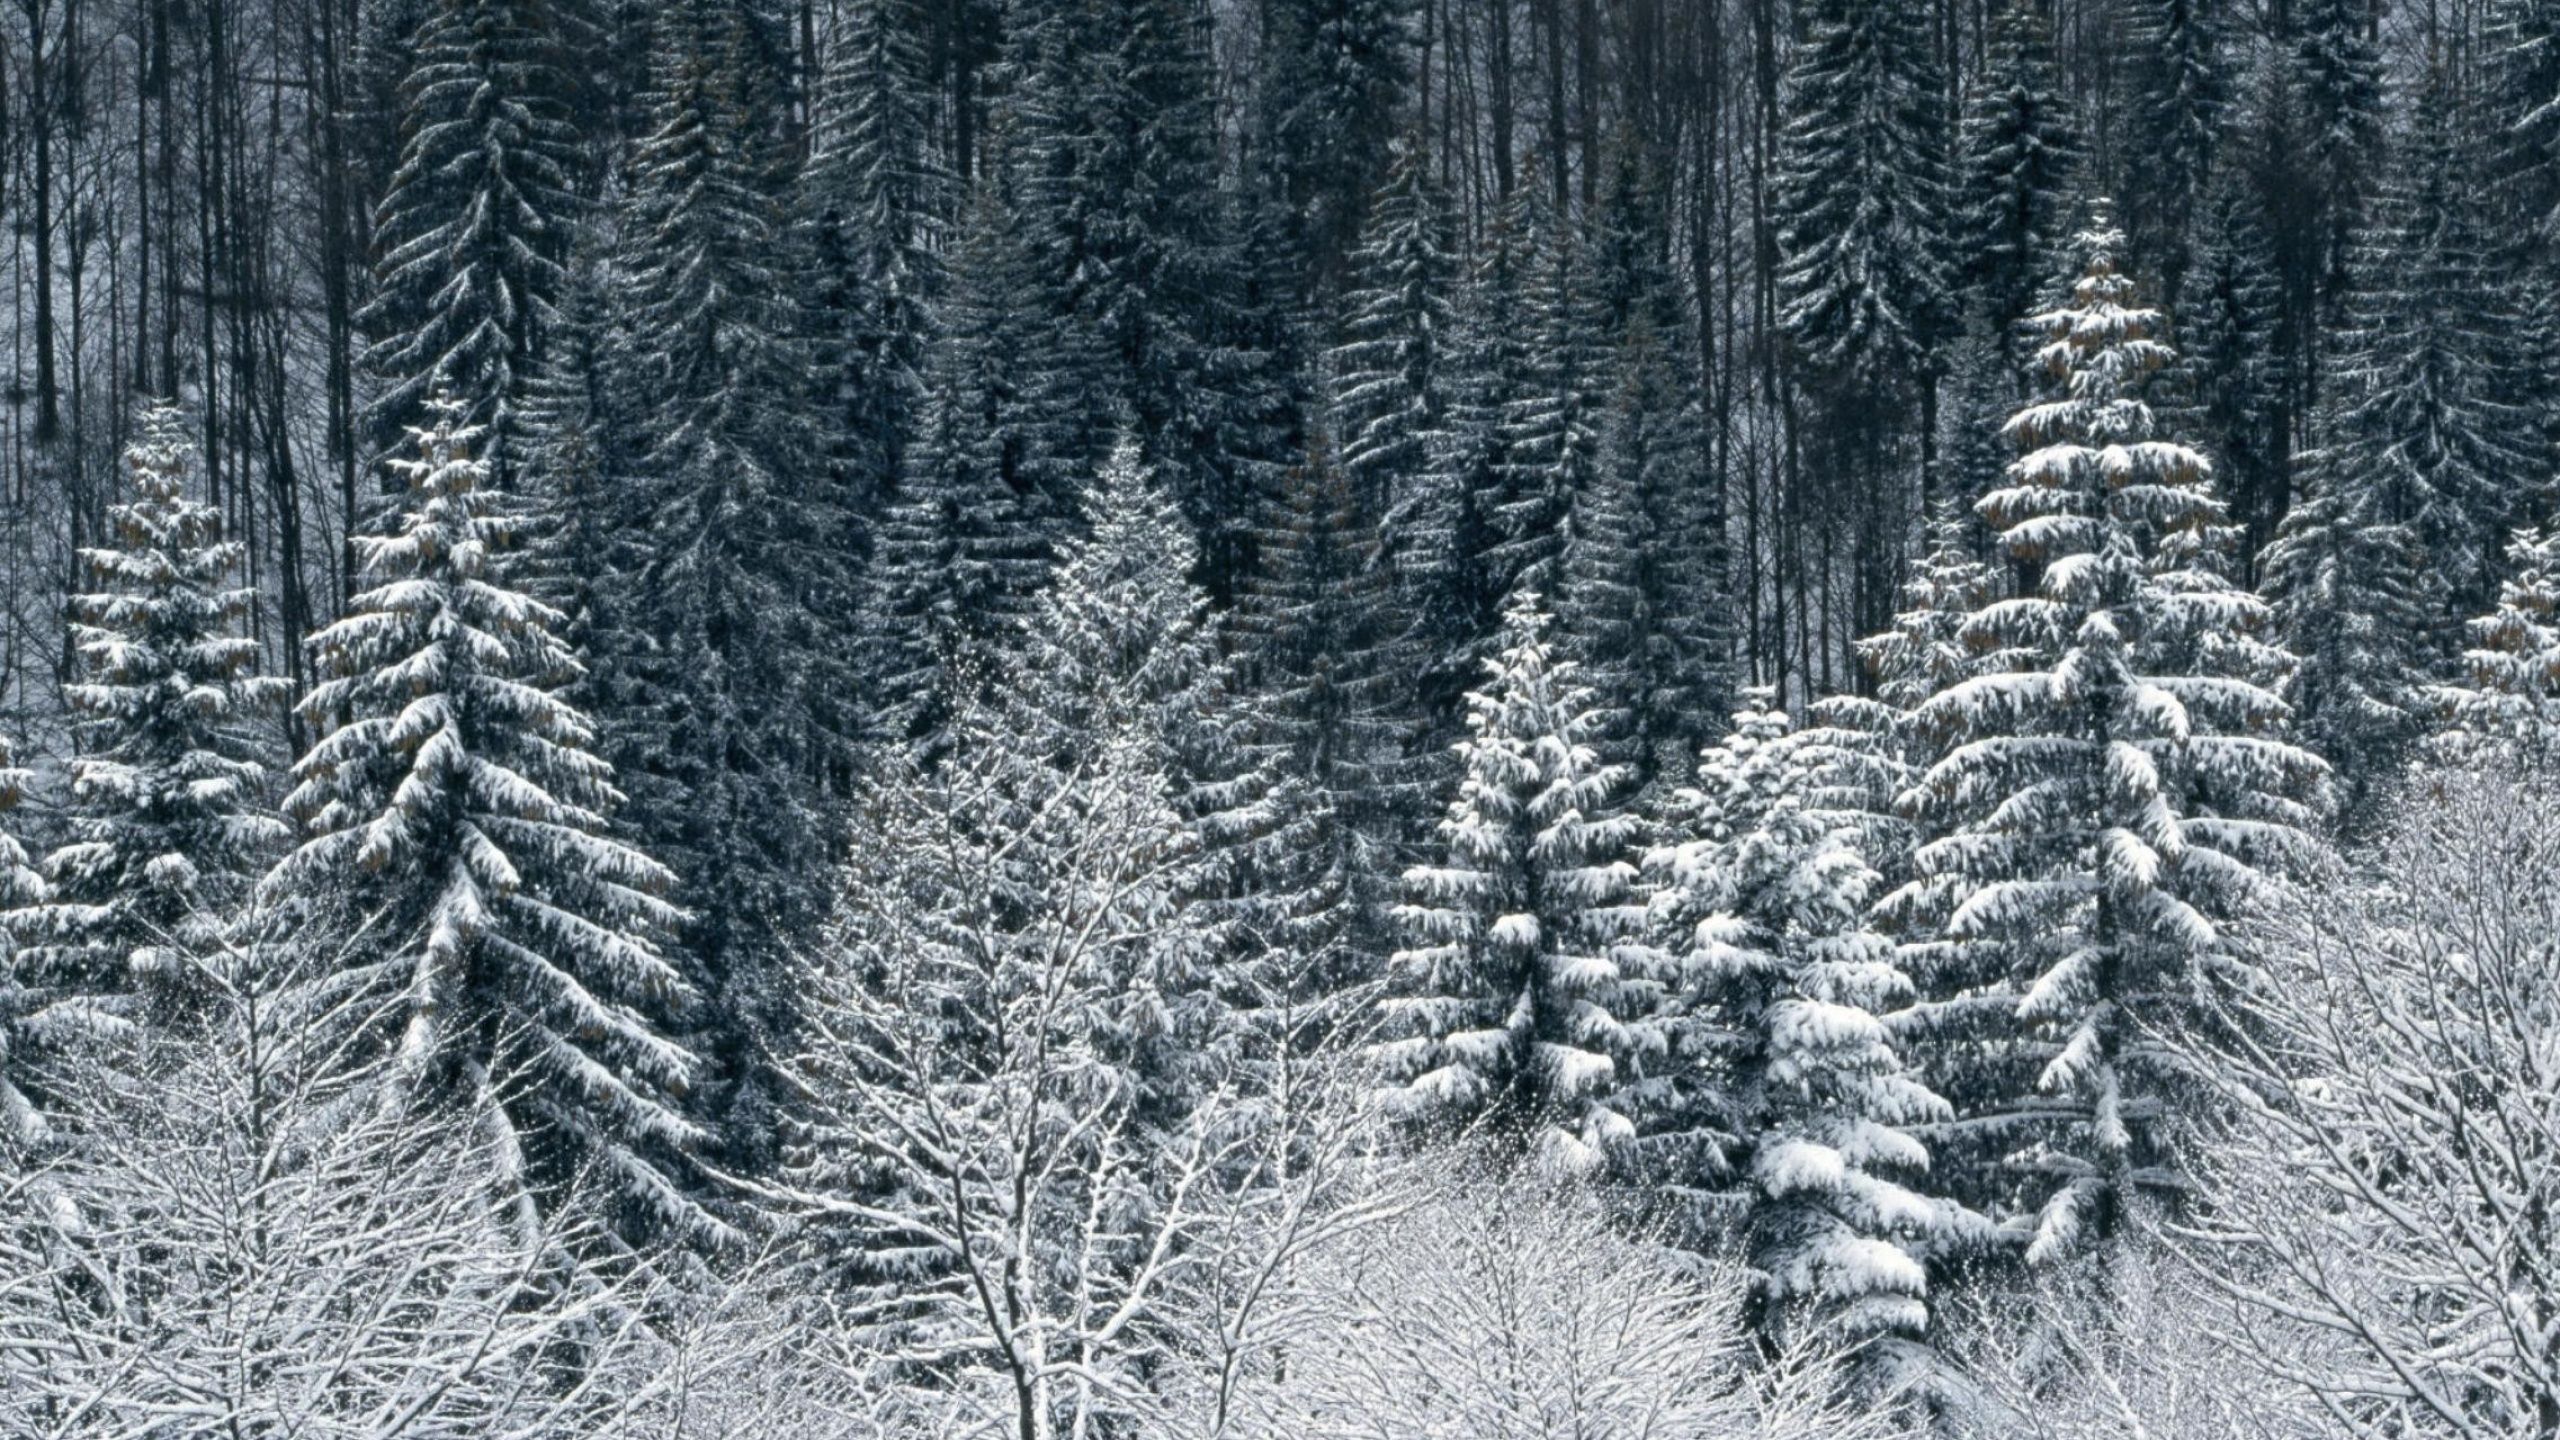 X snow trees forest desktop pc and mac wallpaper winter wallpaper desktop winter wonderland wallpaper winter snow wallpaper